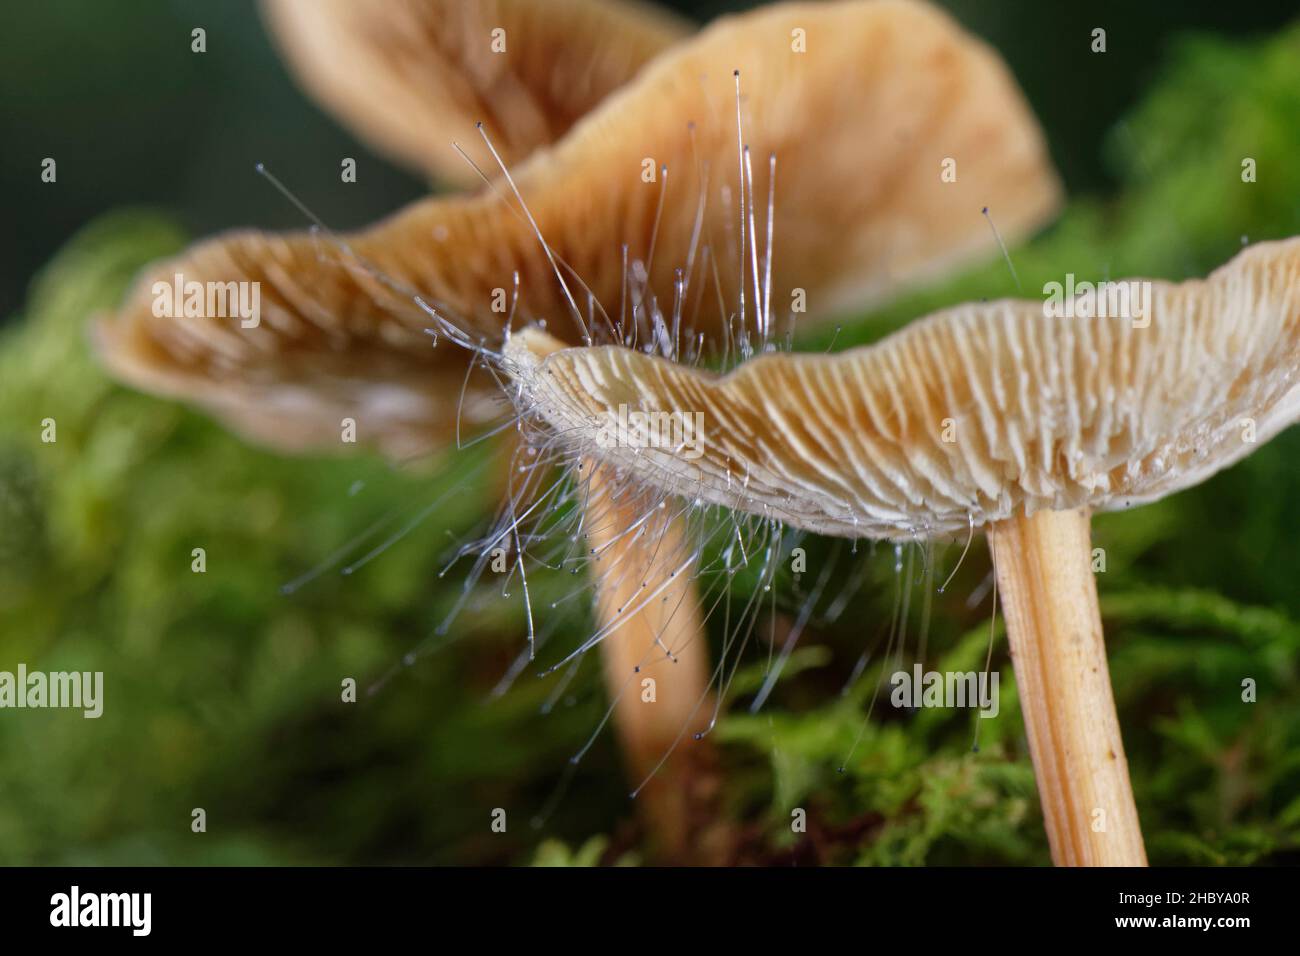 Bonnet Pin mould (Spinellus fusiger) growing from the cap of a Russet toughshank (Gymnopus dryophilus) mushroom, Gloucestershire, UK, October. Stock Photo